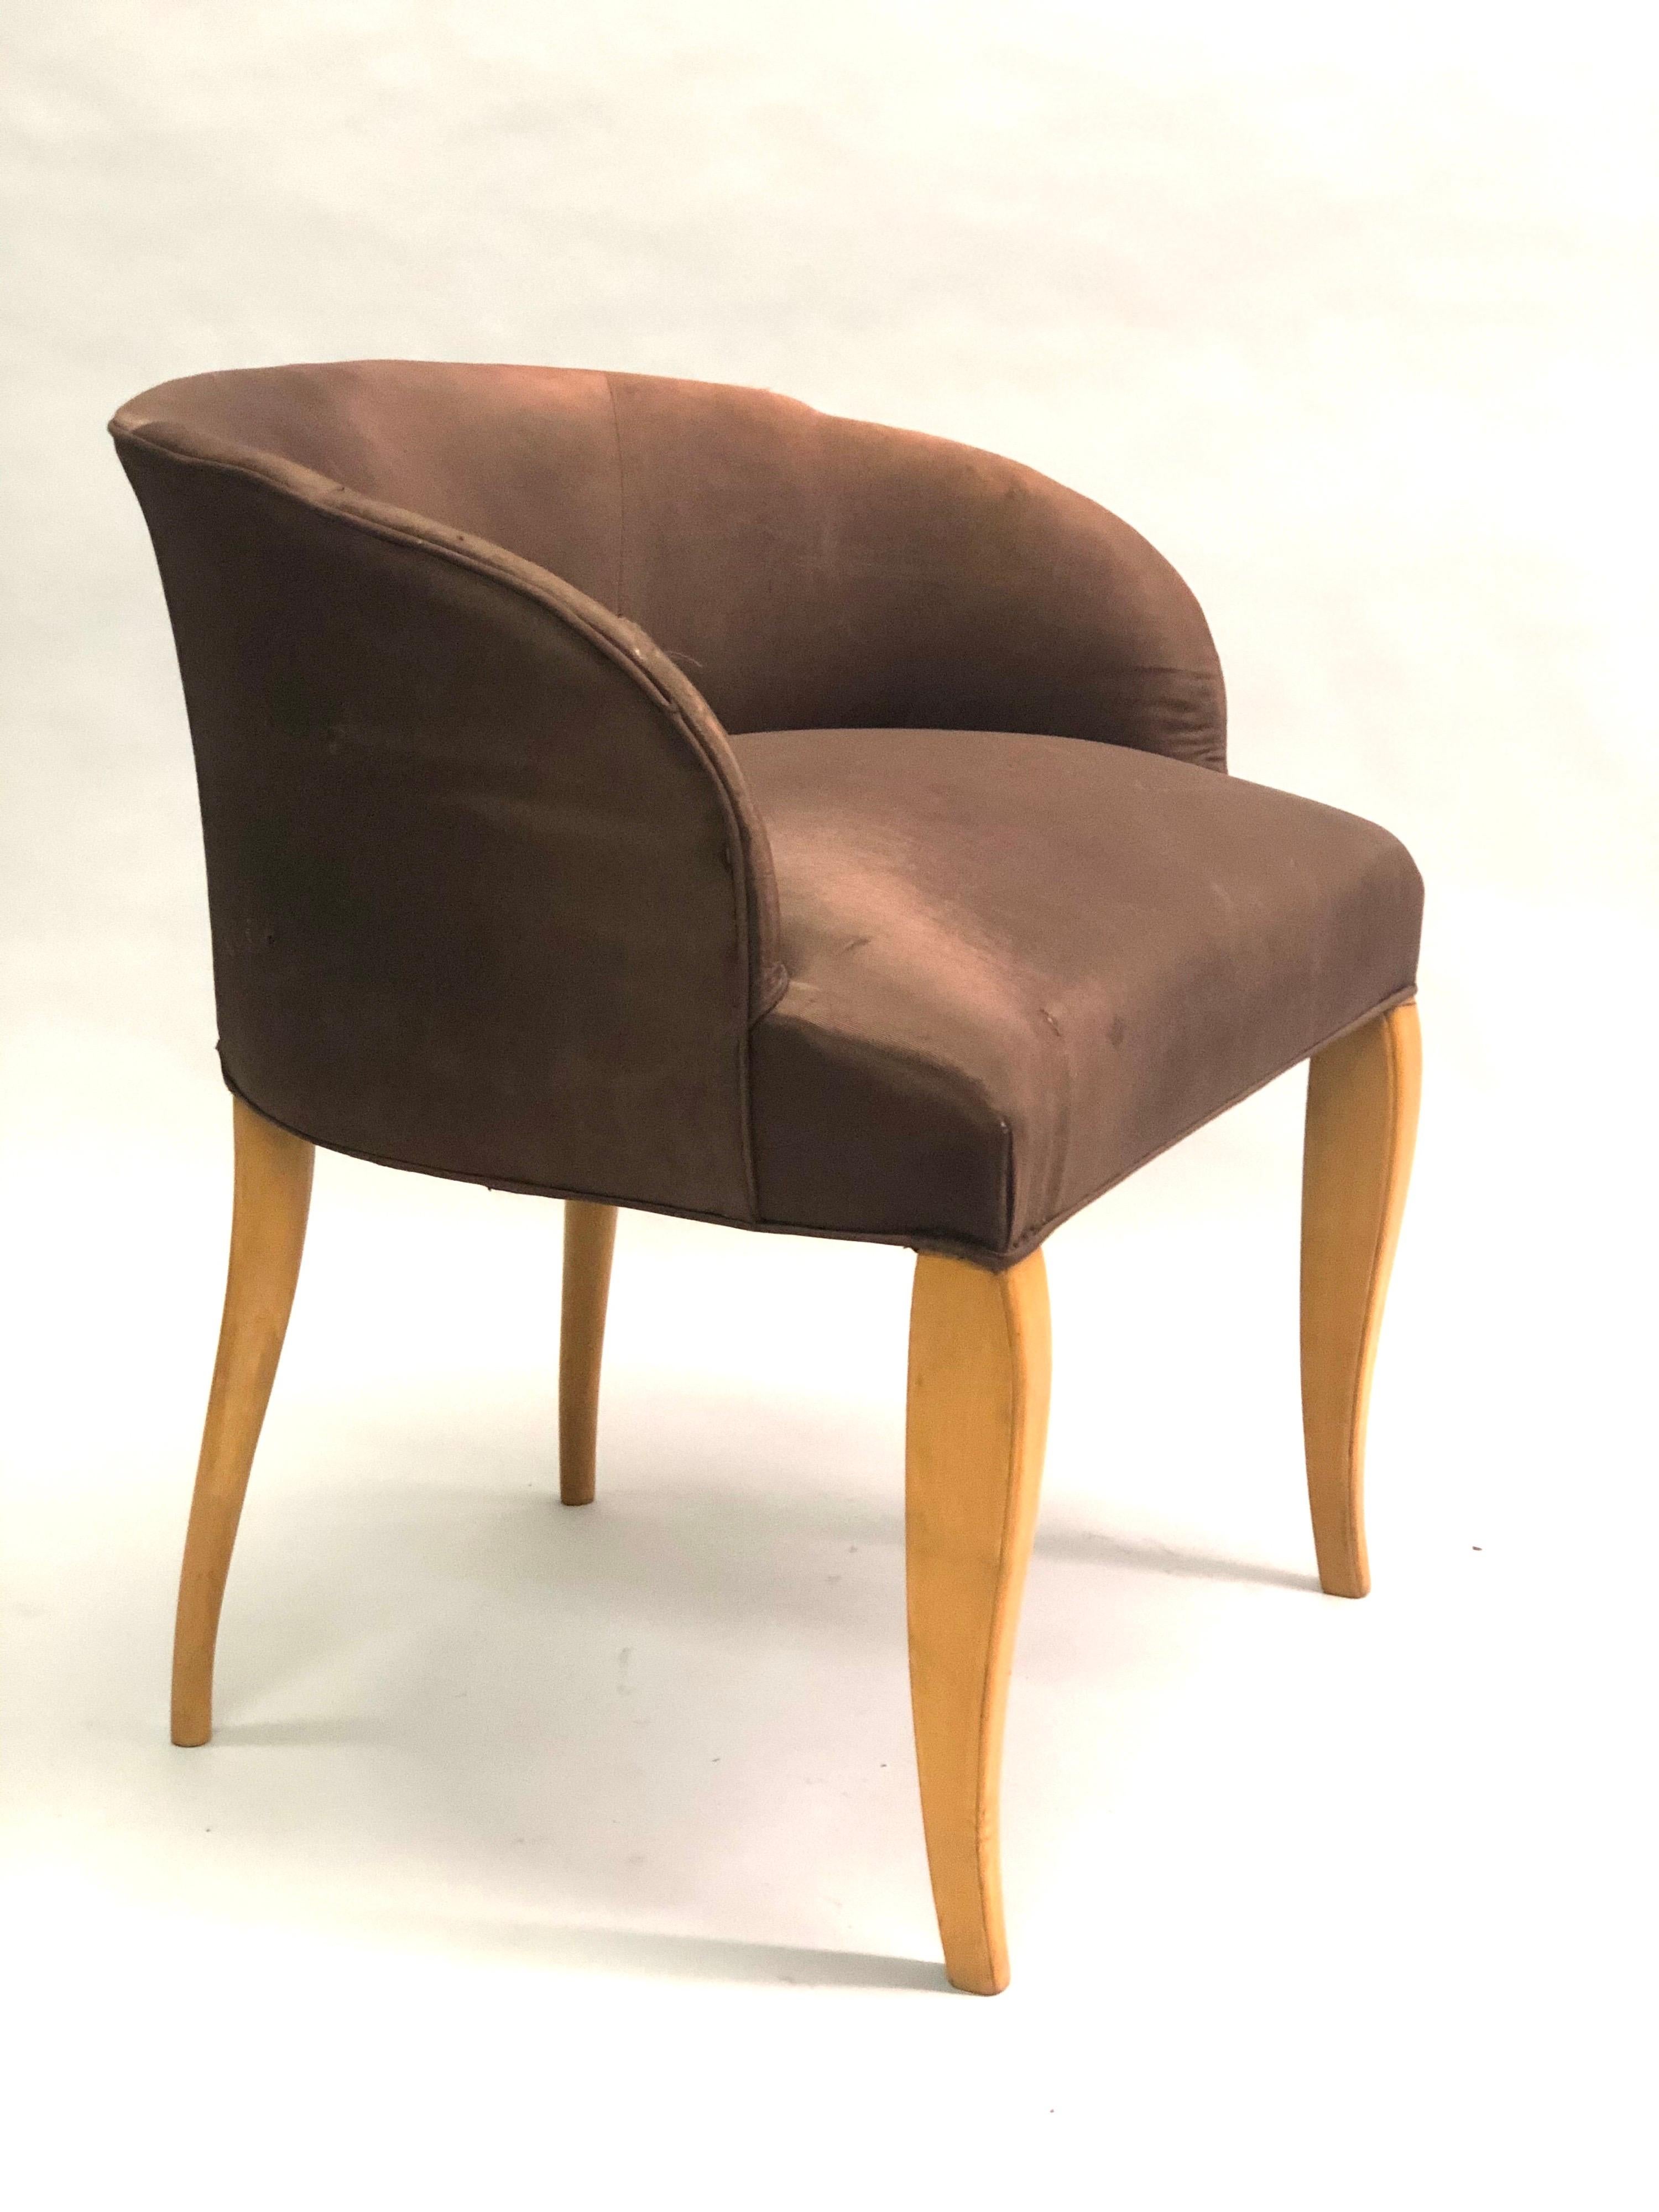 Elegant, stylish French / Belgian Art Deco vanity chair in Sycamore wood by Van der Borcht Freres, circa 1925-1930. The piece has an exquisite form highlighted by the sloped, oval, barrel back which is supported by contrasting front and rear saber